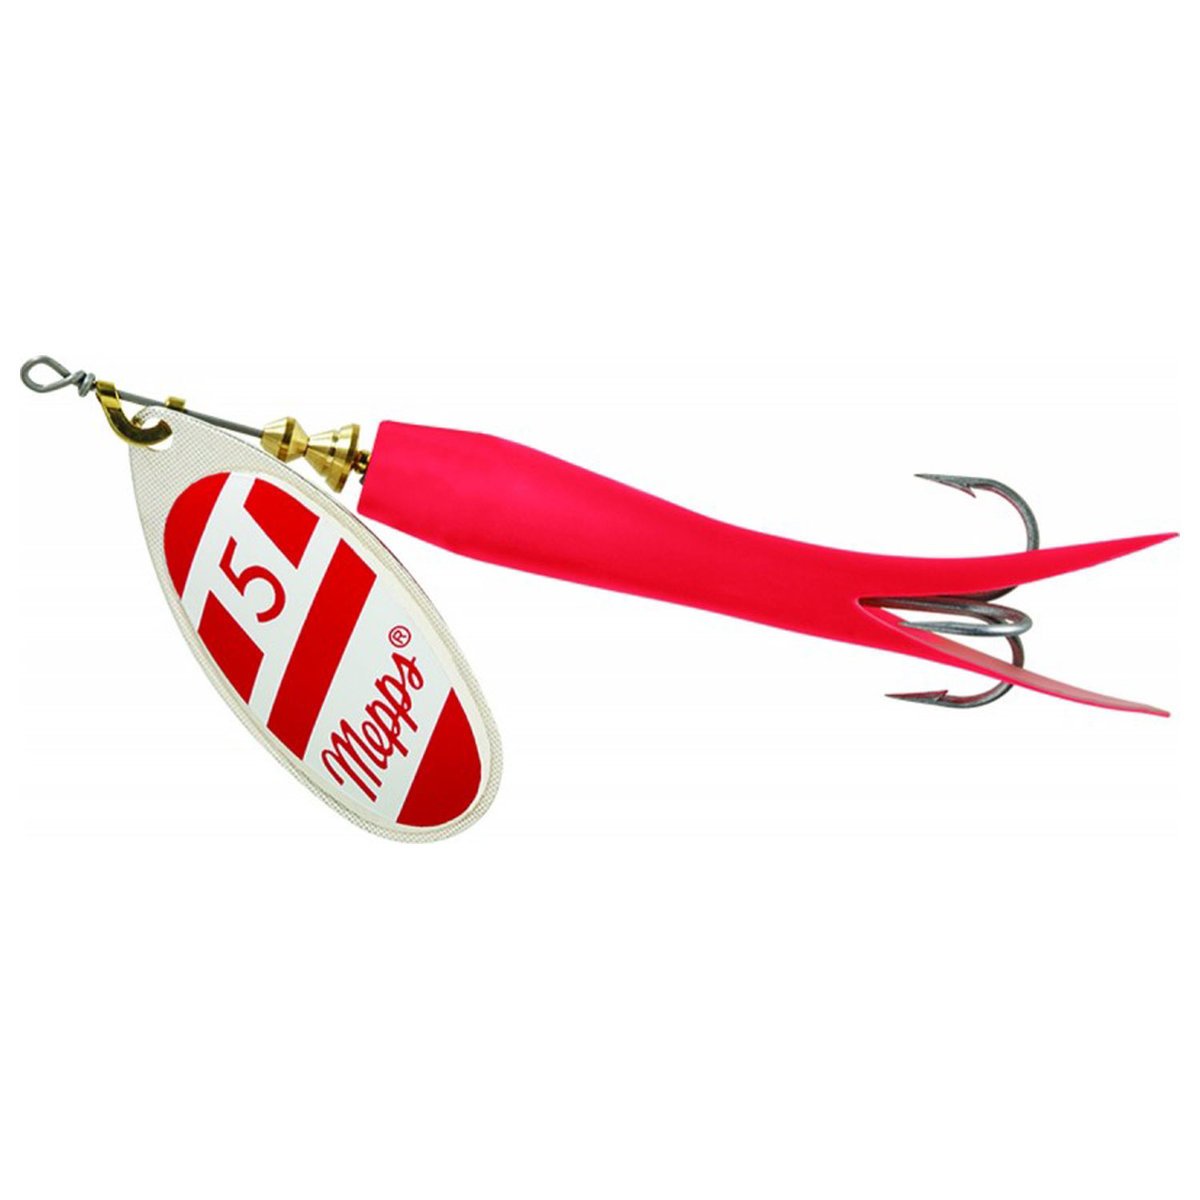 Deadly Dick Deadly Dick Long Casting / Jigging Lure - 21 - Fluorescent – Deadly  Dick Classic Lures